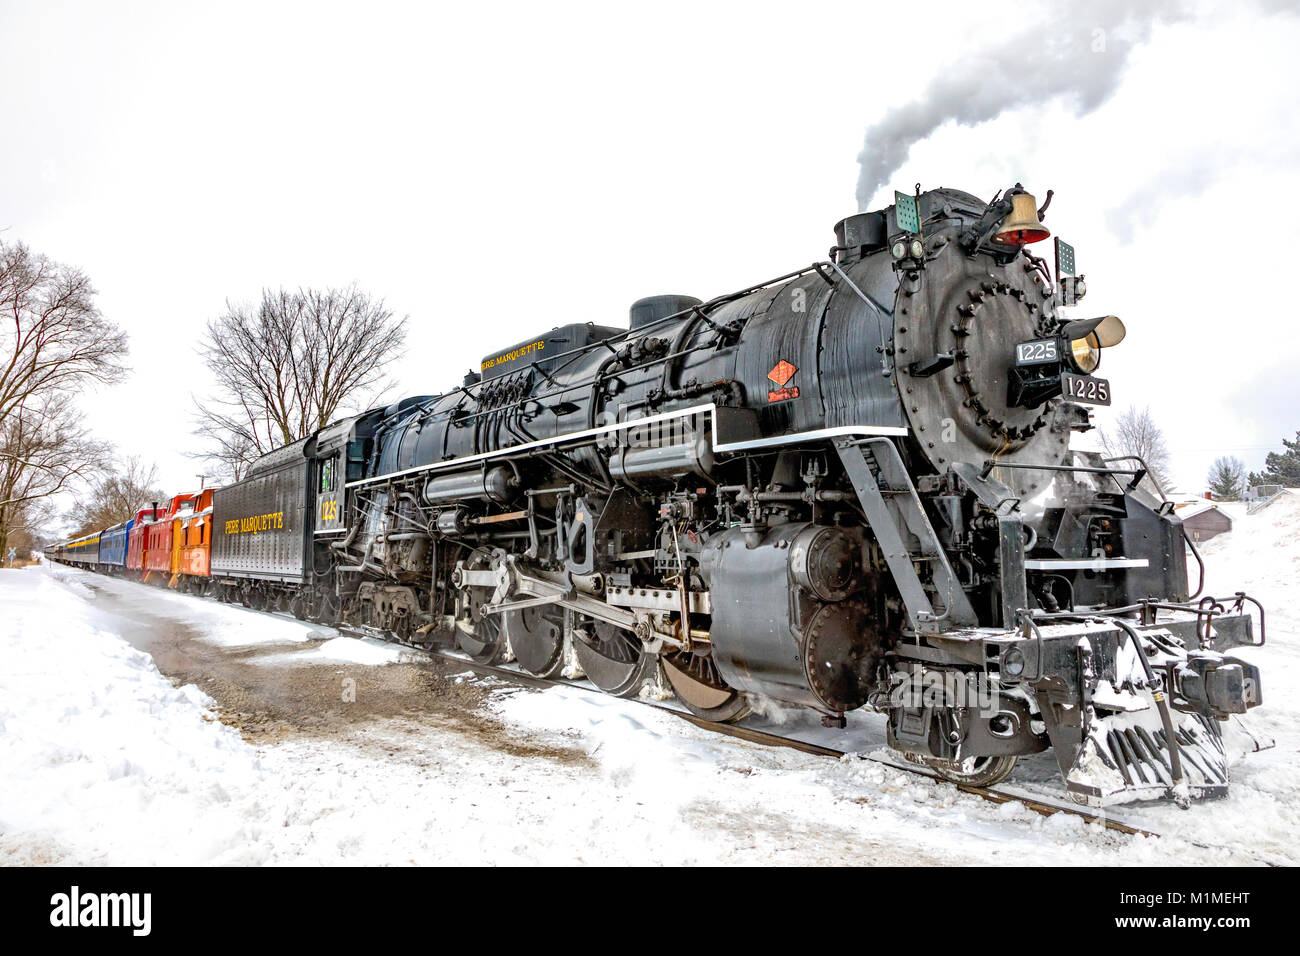 The Pere Marquette 1225 “North Pole Express” a vintage steam engine, spewing steam on a snowy day Stock Photo